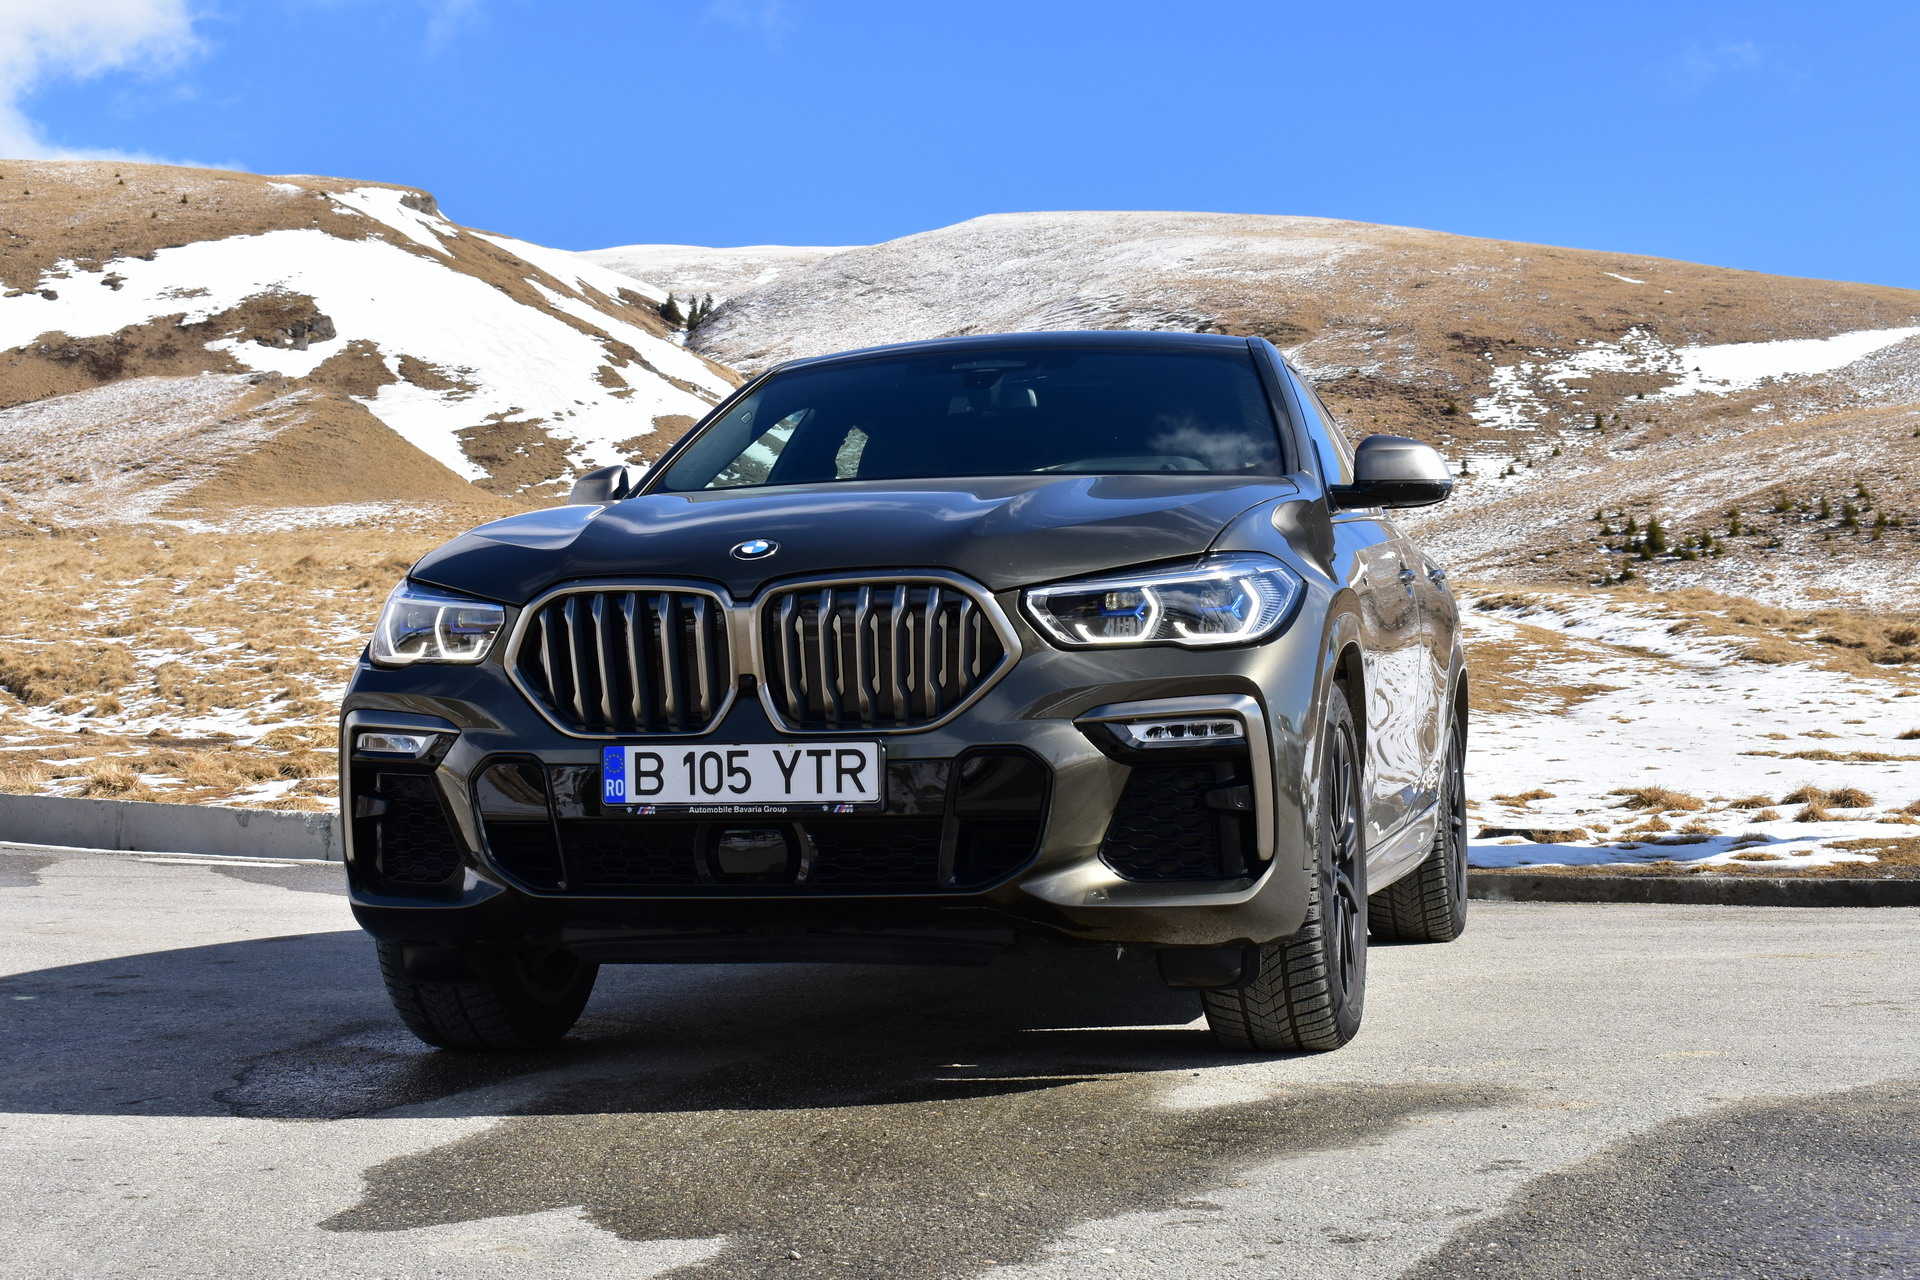 TEST DRIVE: 2020 BMW X6 M50d - Aggressive, Effortless, Compelling